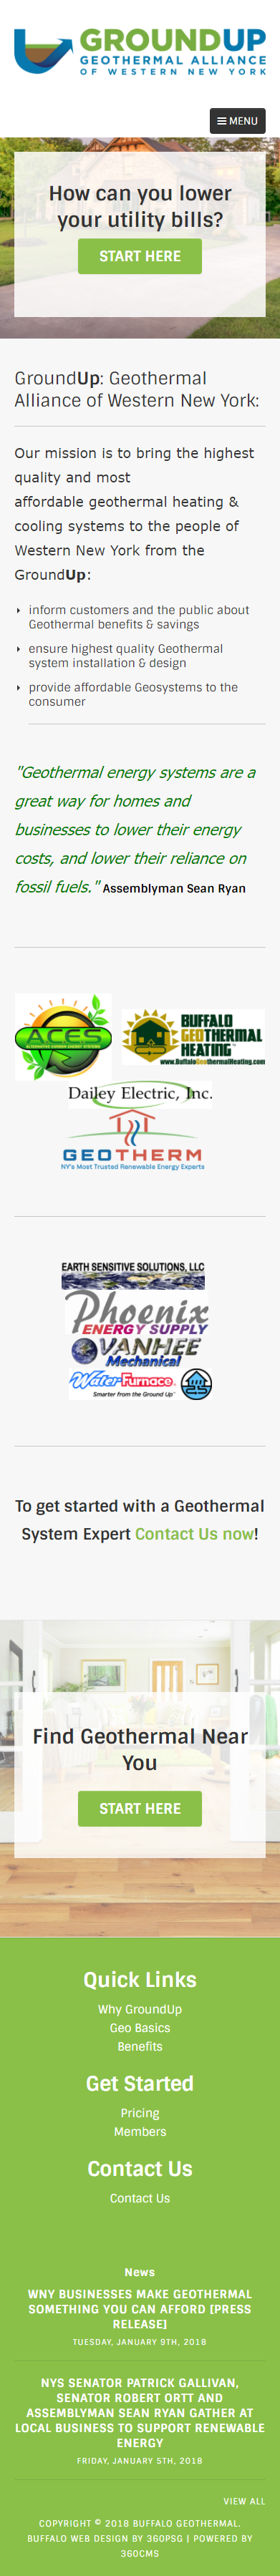 Geothermal Alliance WNY